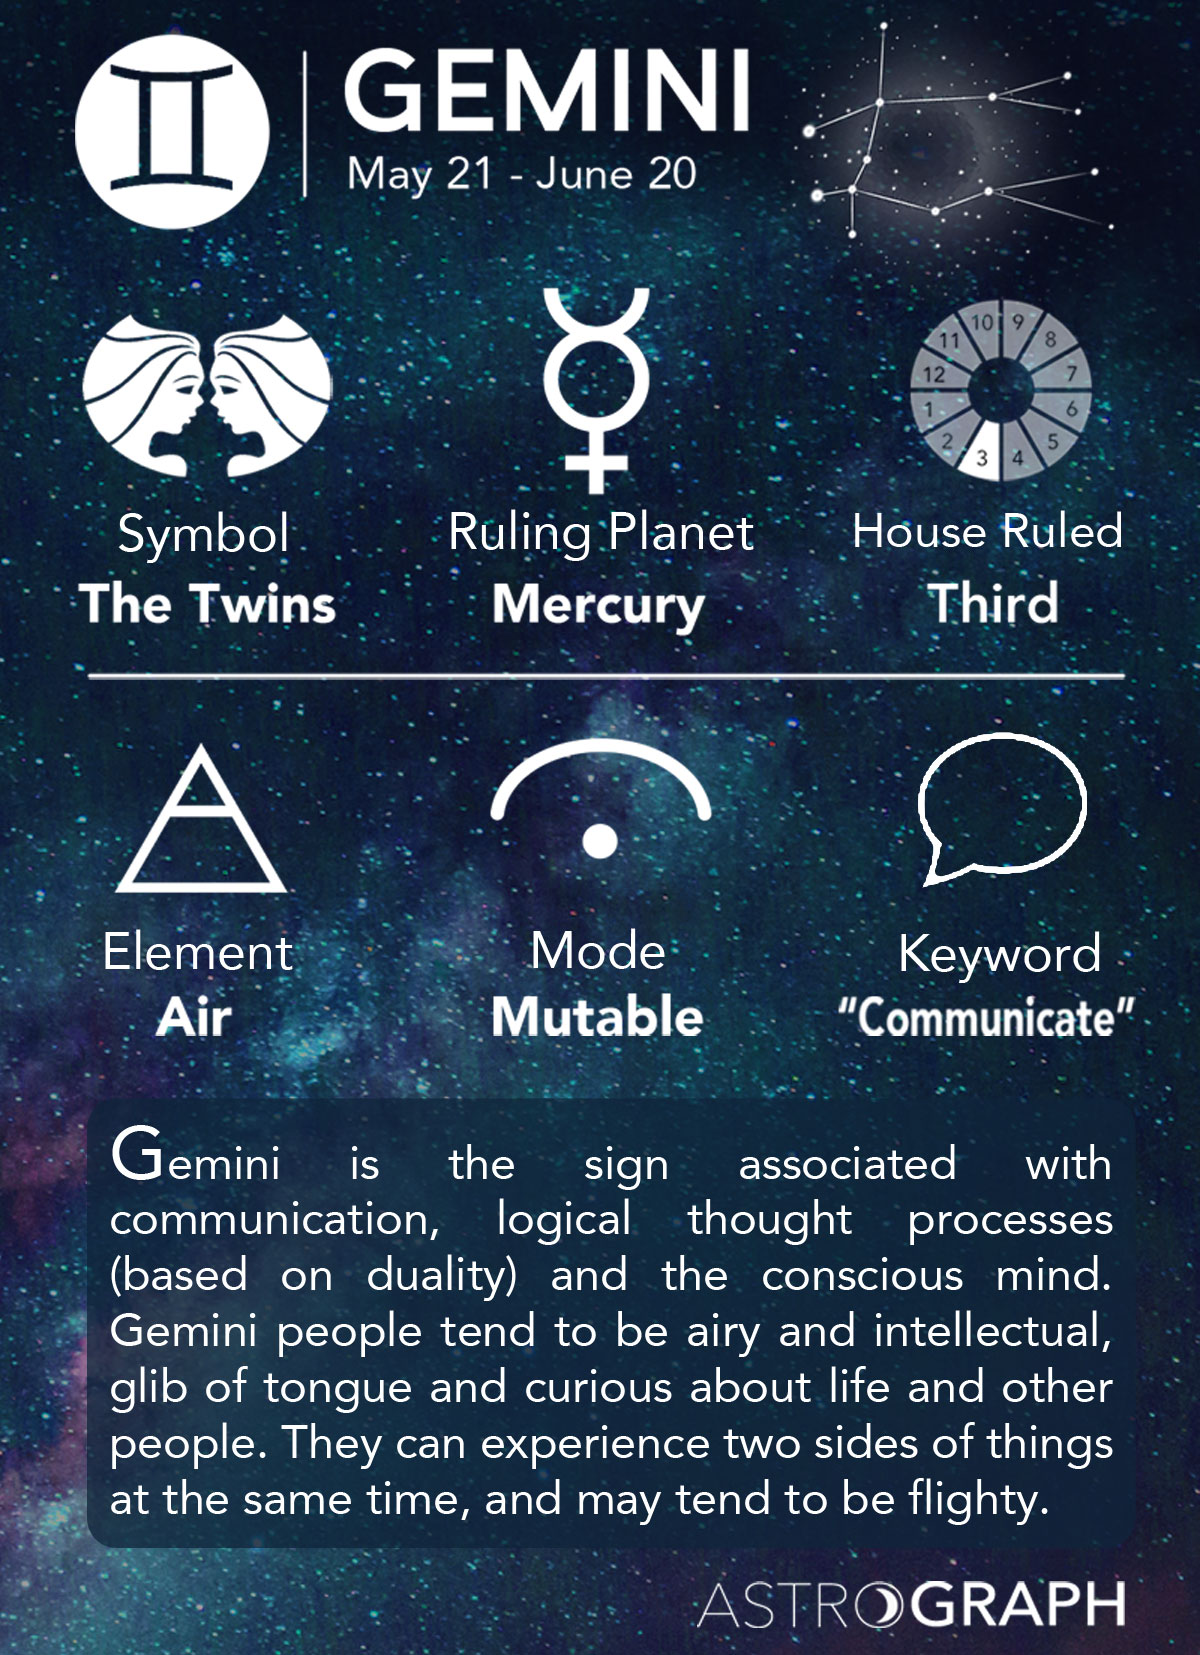 What is a Gemini House?